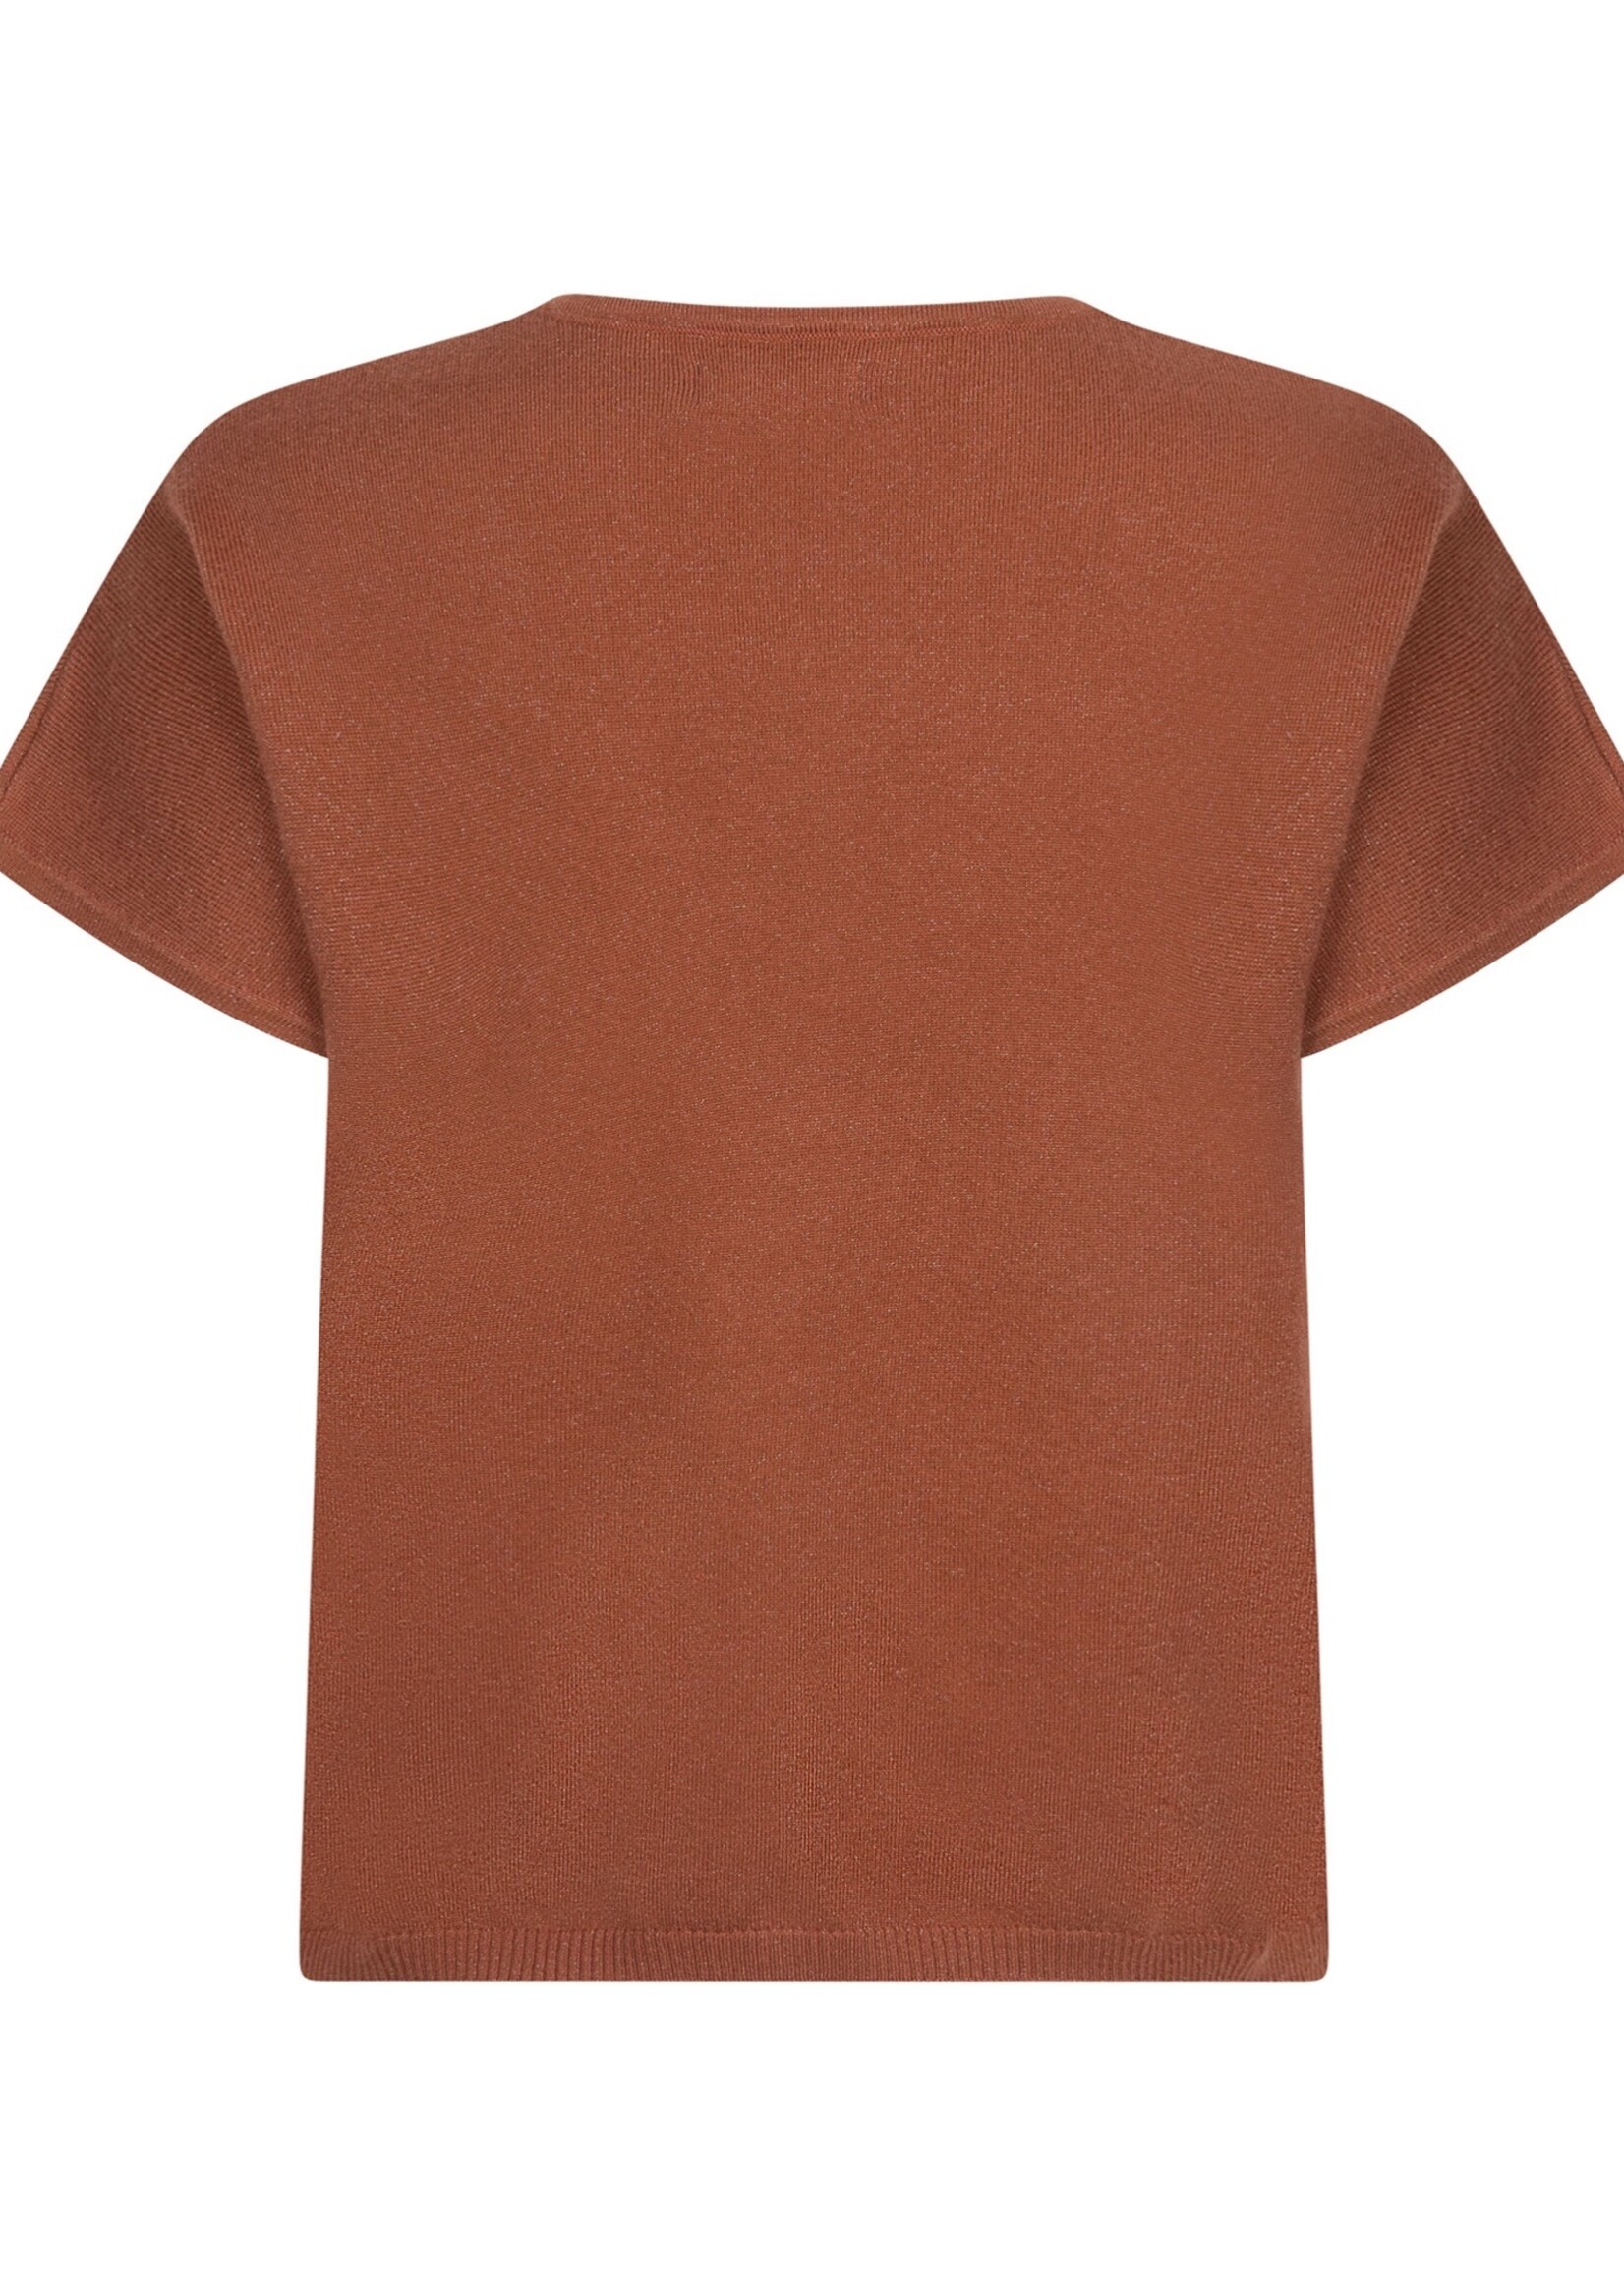 Ydence Knitted top Sammy rust